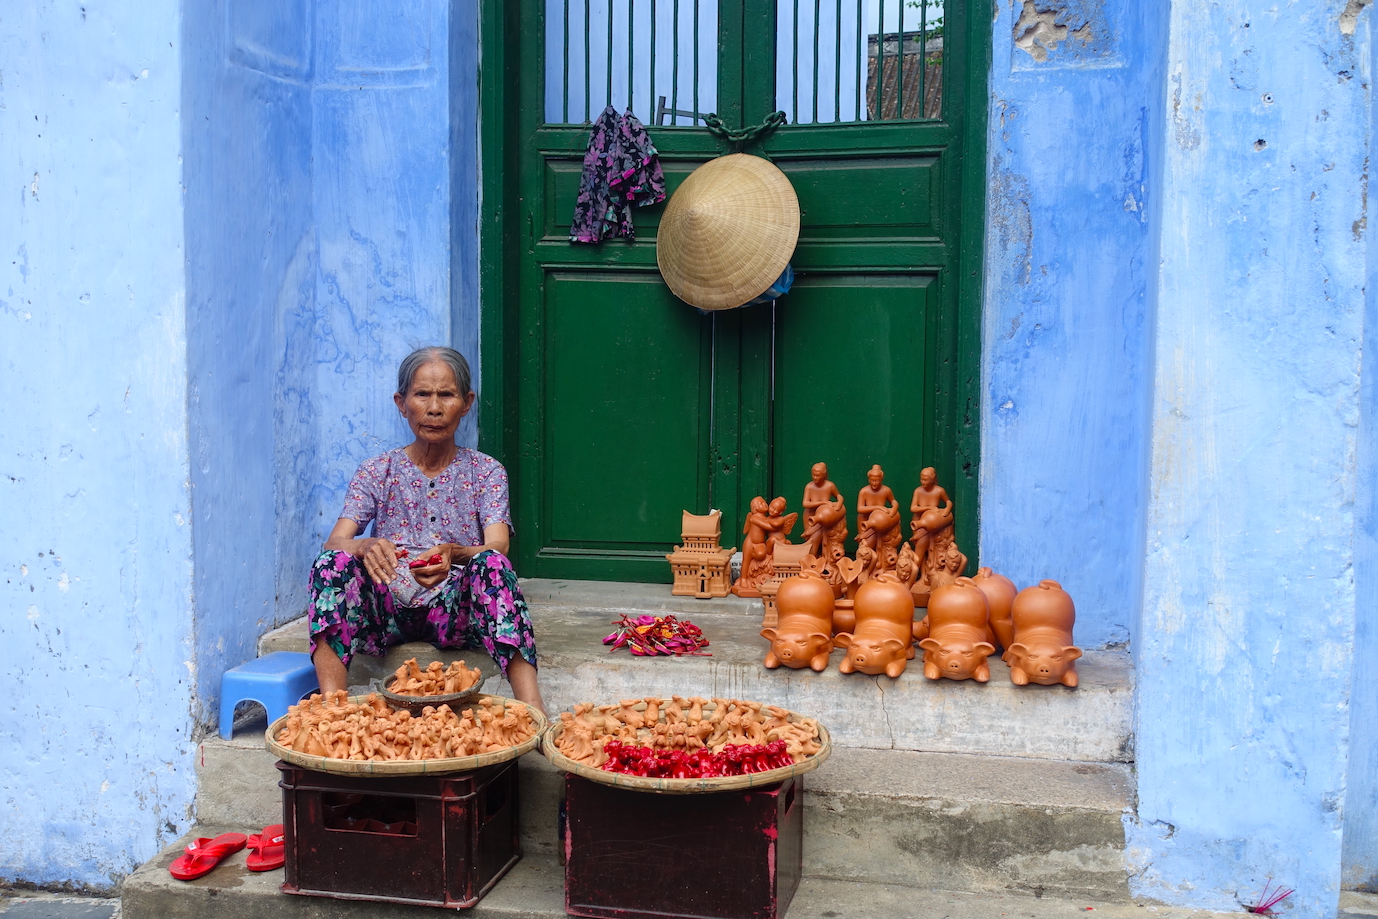 Woman selling stuff on the streets in Hoi An